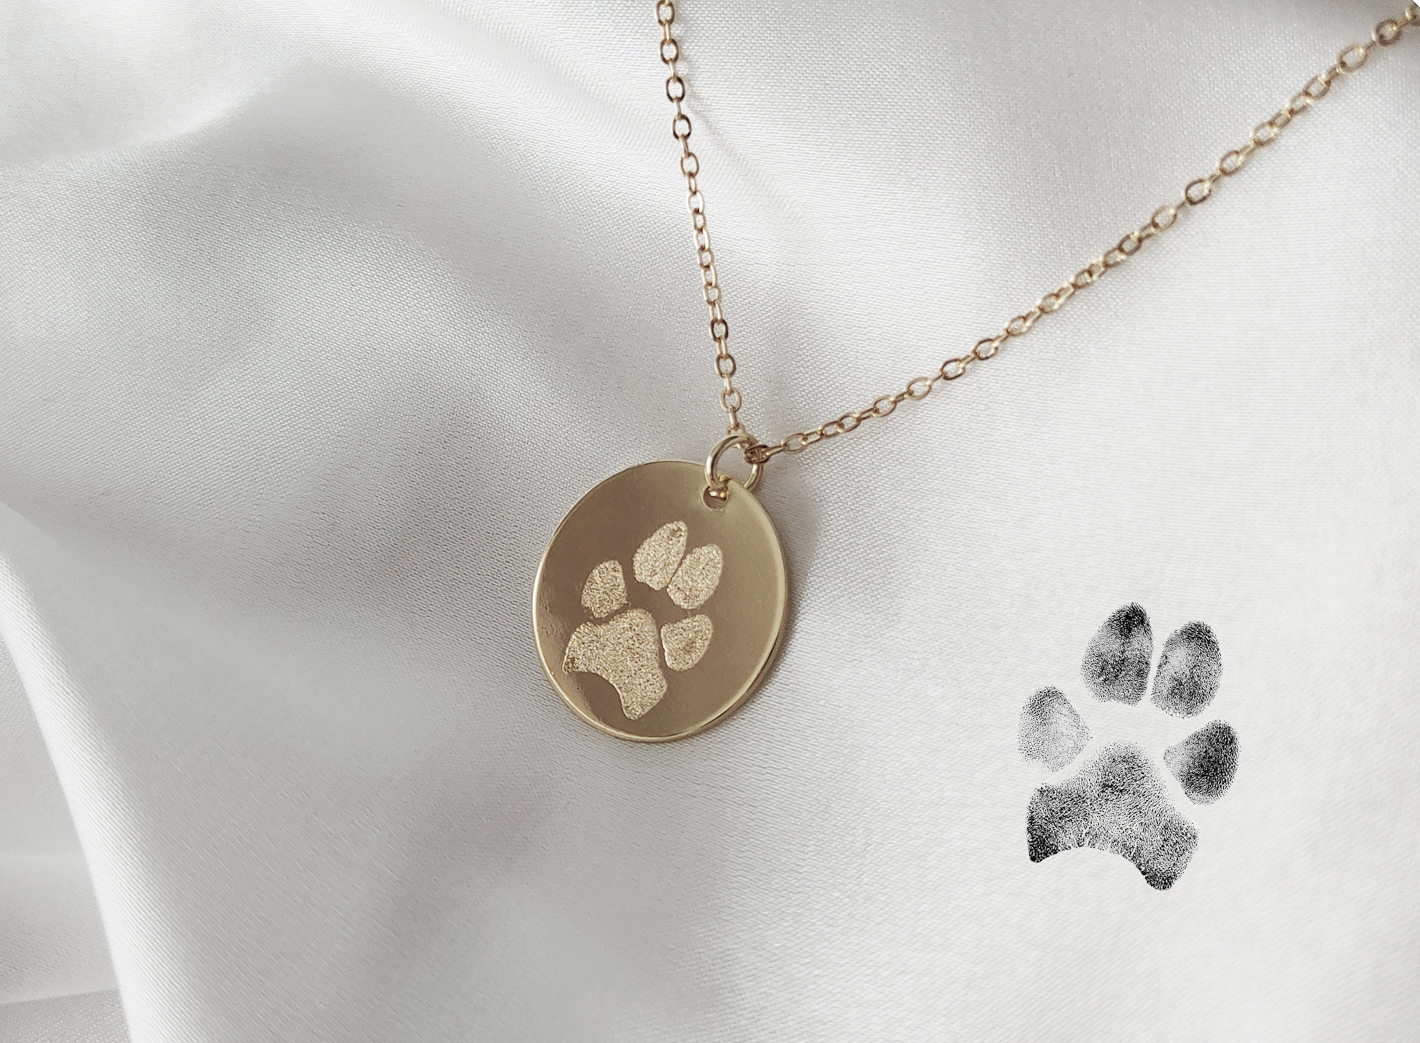 ONEFINITY Paw Print Necklace Sterling Silver Dog Paw Heart Crystal Necklace  Pet Cat Dog Paw Pendant Jewelry for Women Girls Gifts